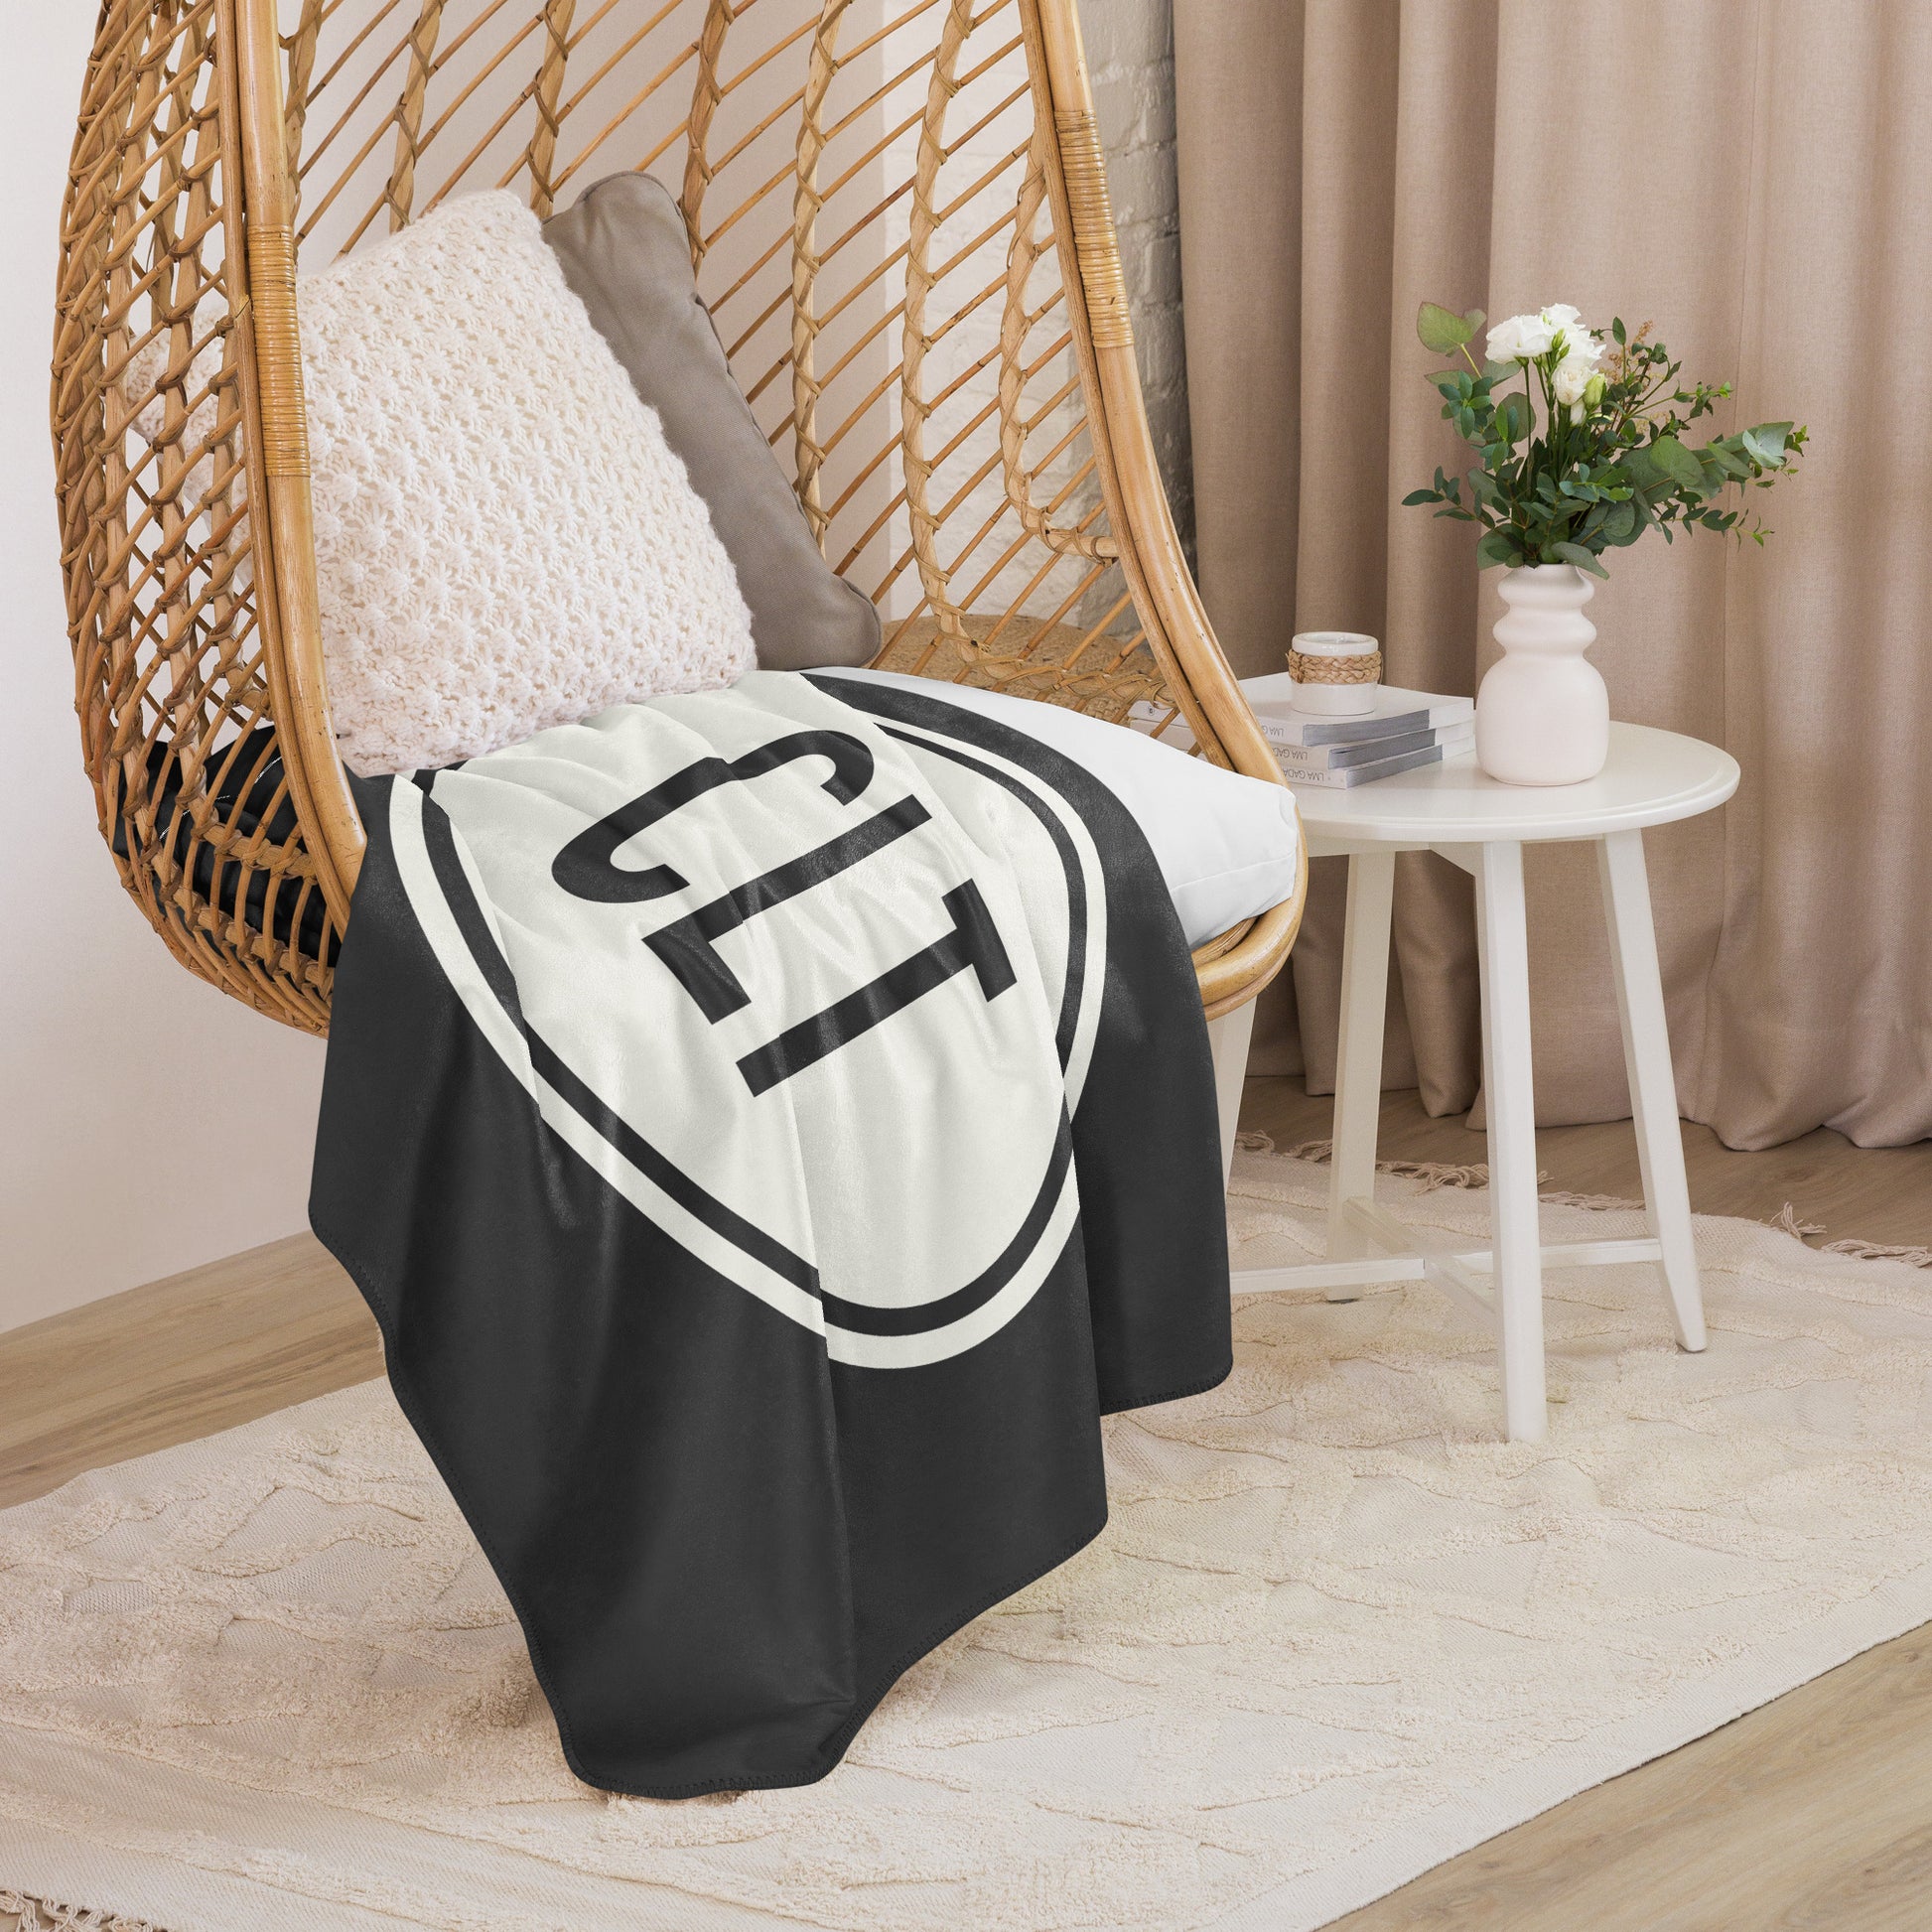 Unique Travel Gift Sherpa Blanket - White Oval • CLT Charlotte • YHM Designs - Image 06